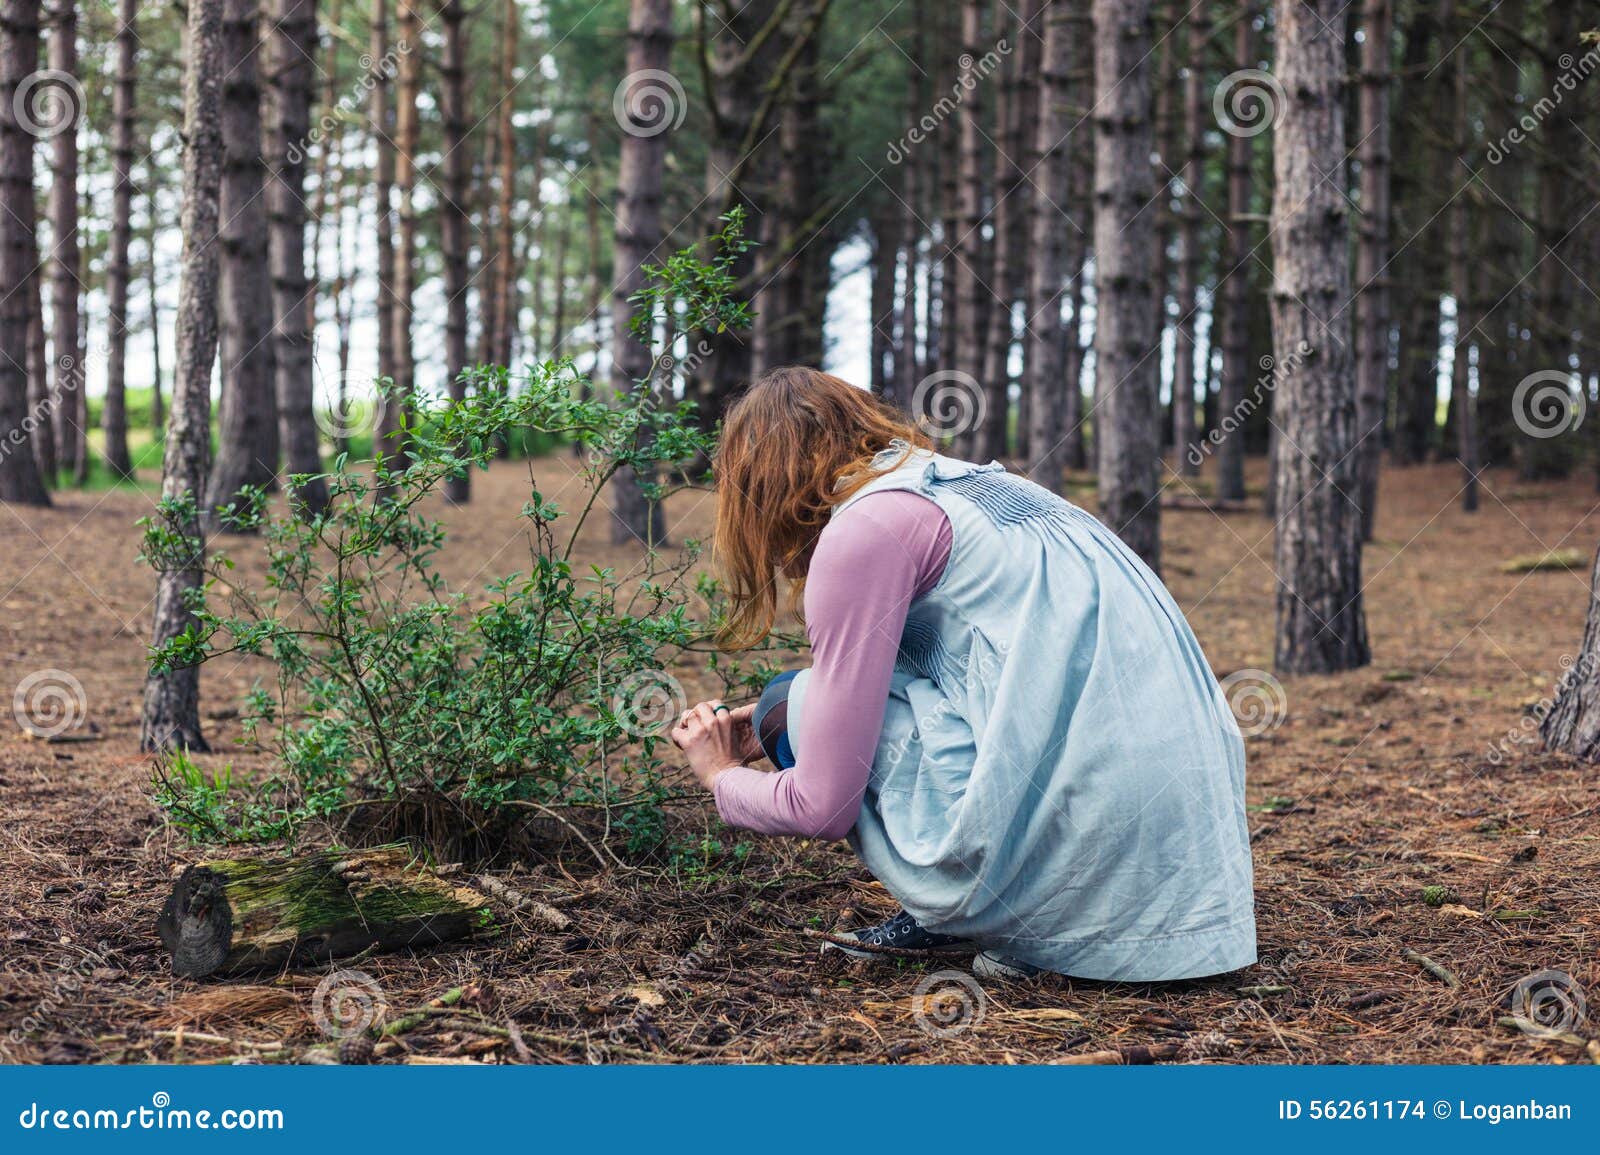 woman foraging in forest